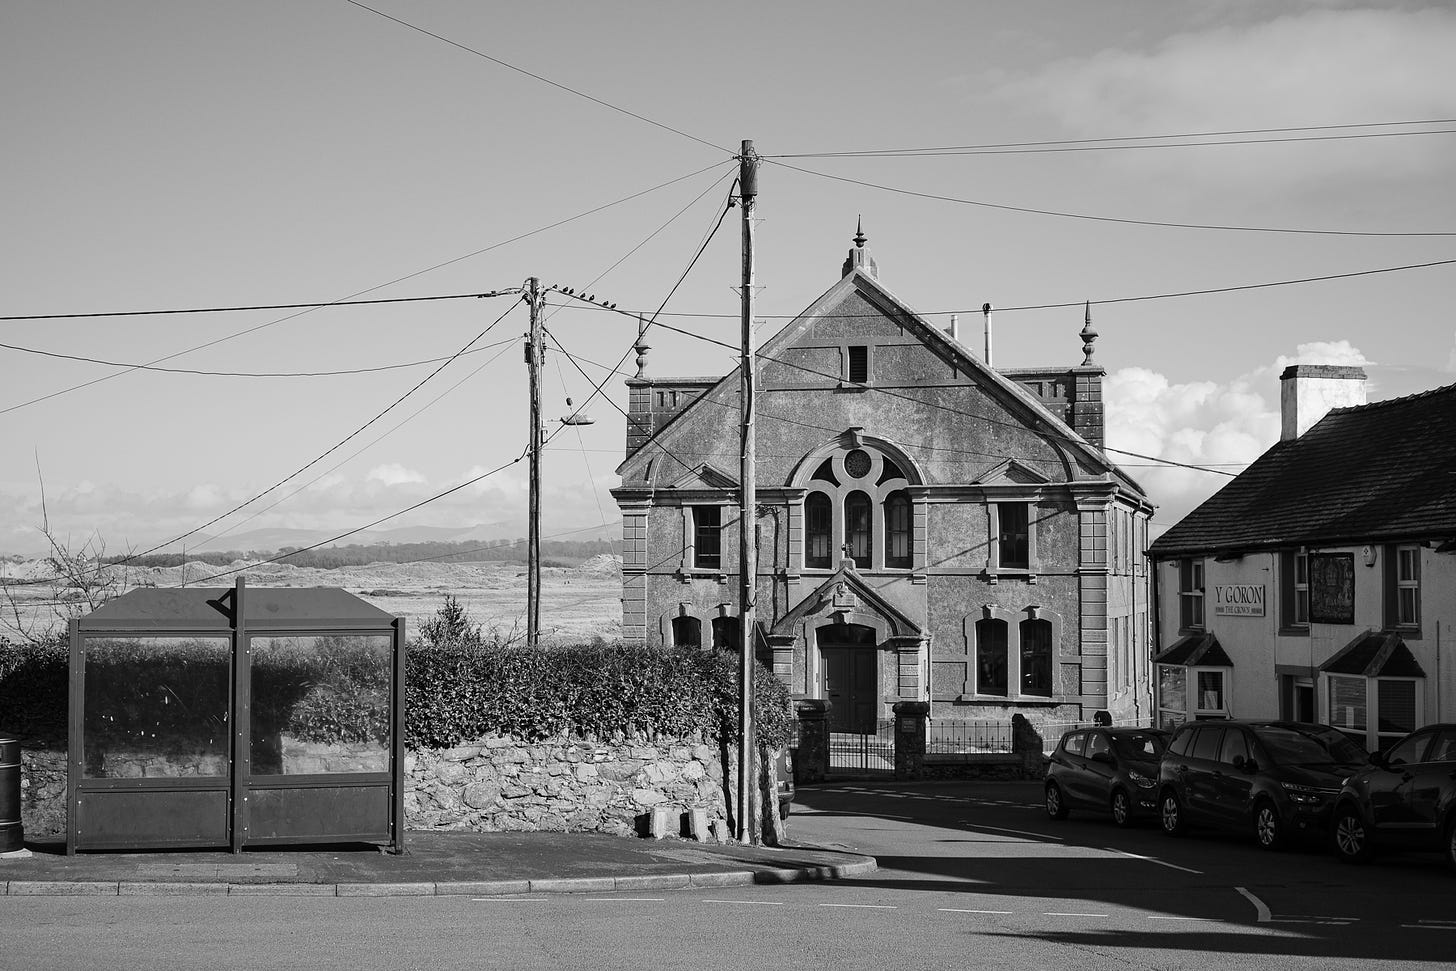 Black and white photograph of a street scene featuring a bus shelter, telegraph pole and wires in front of a former chapel and a pub on the right called Y Goron